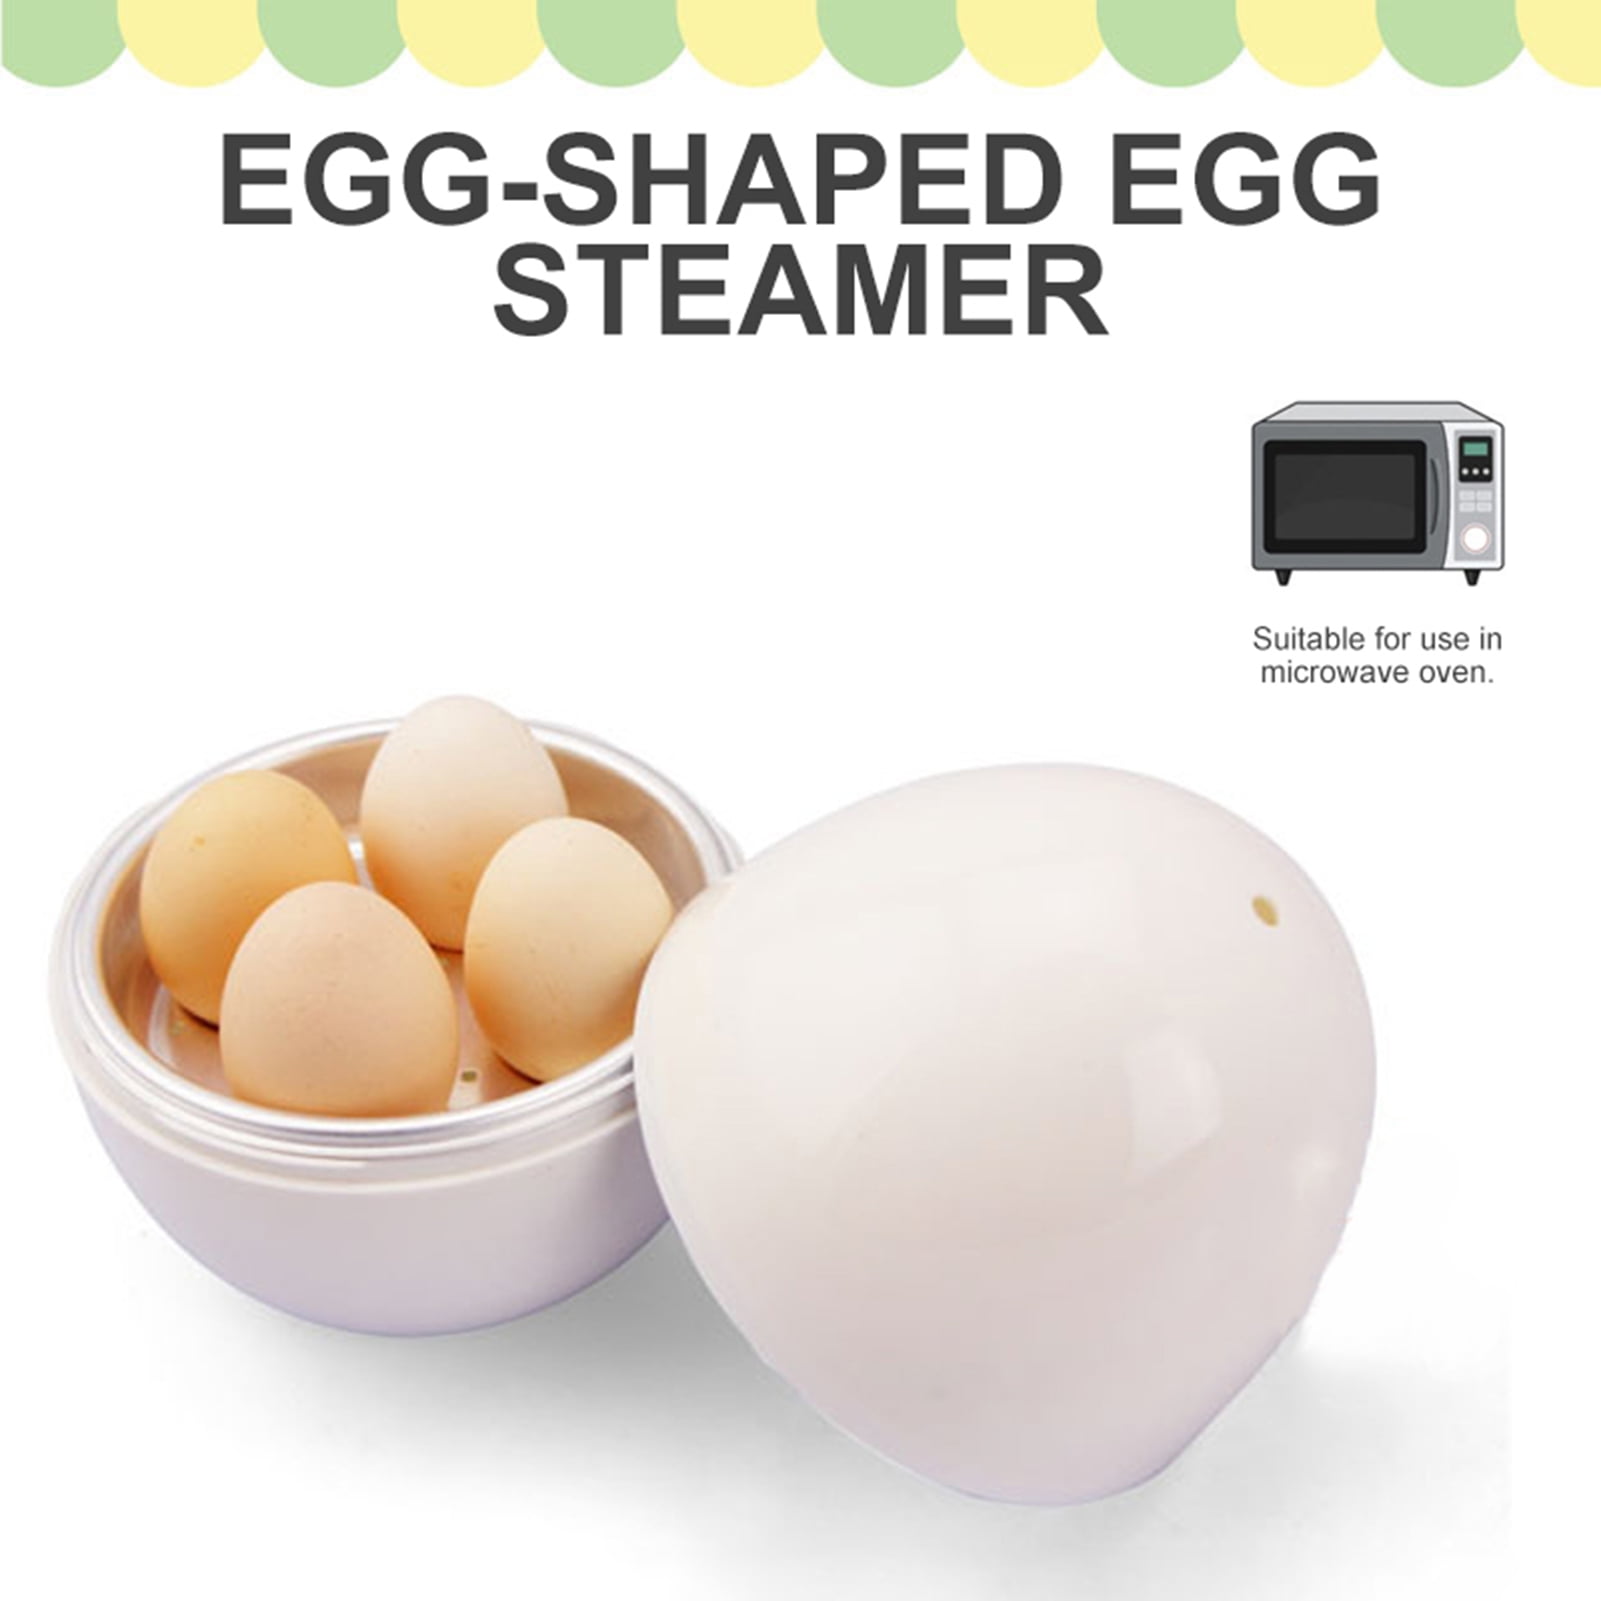 SANJIANKER XB-EC06 14 Egg Capacity Egg Cooker,350W Electric Egg Maker,Egg Steamer,Egg Boiler,Egg Cooker with Automatic Shut Off, Egg Cooker with Egg